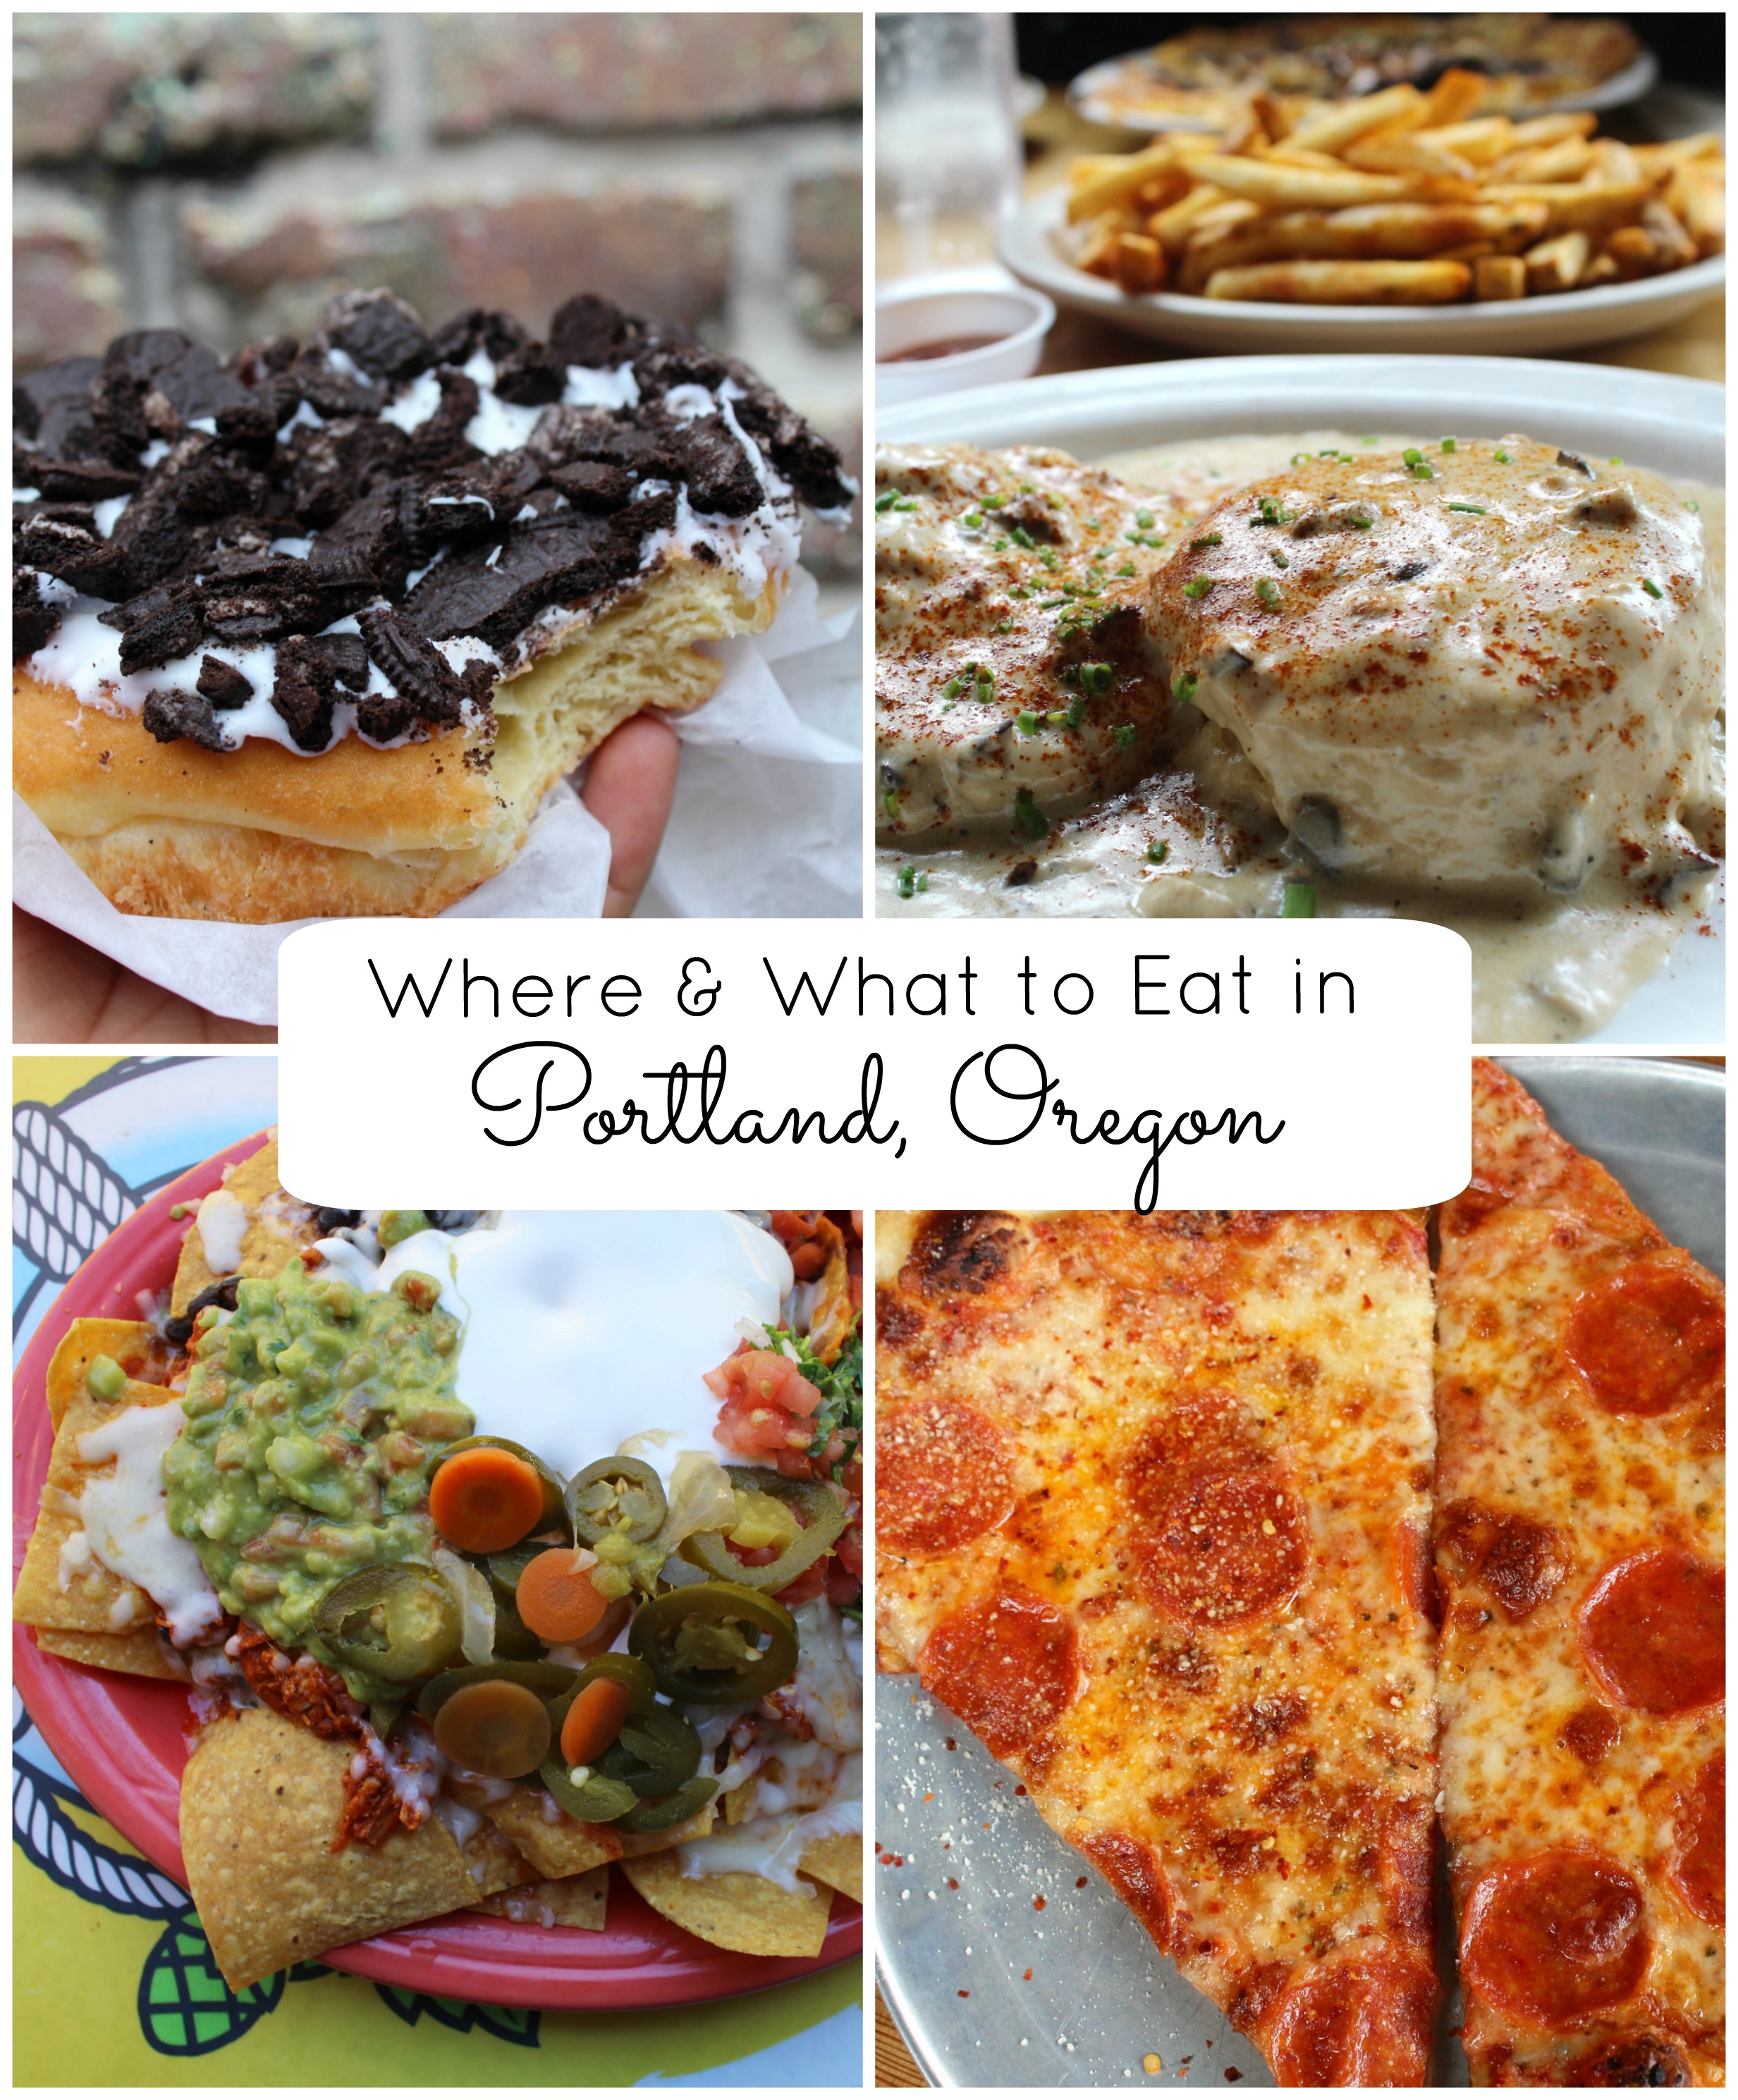 Where & What to Eat in Portland, Oregon